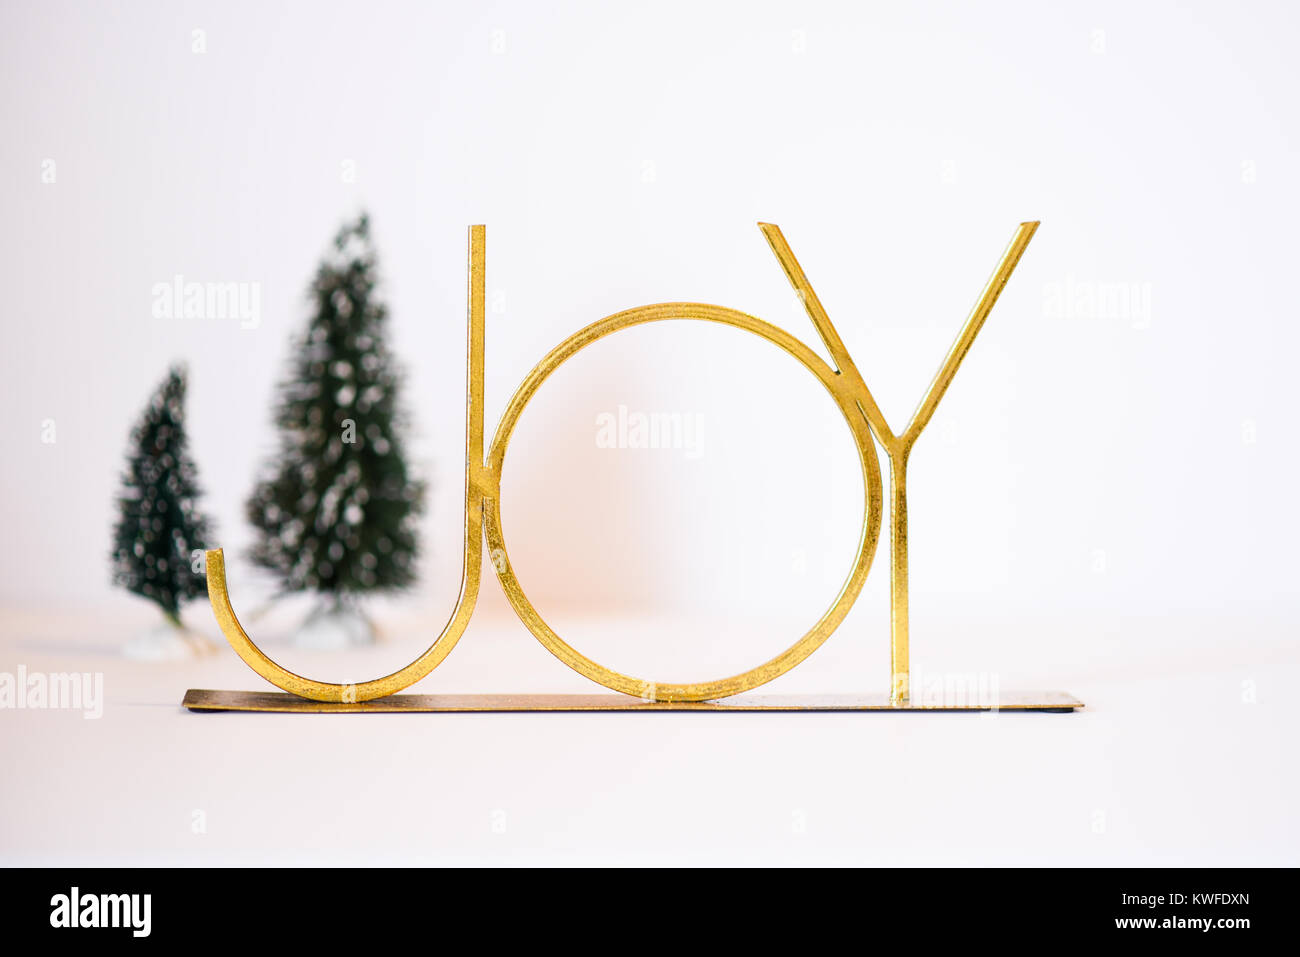 Christmas scene featuring a gold JOY and Christmas trees Stock Photo